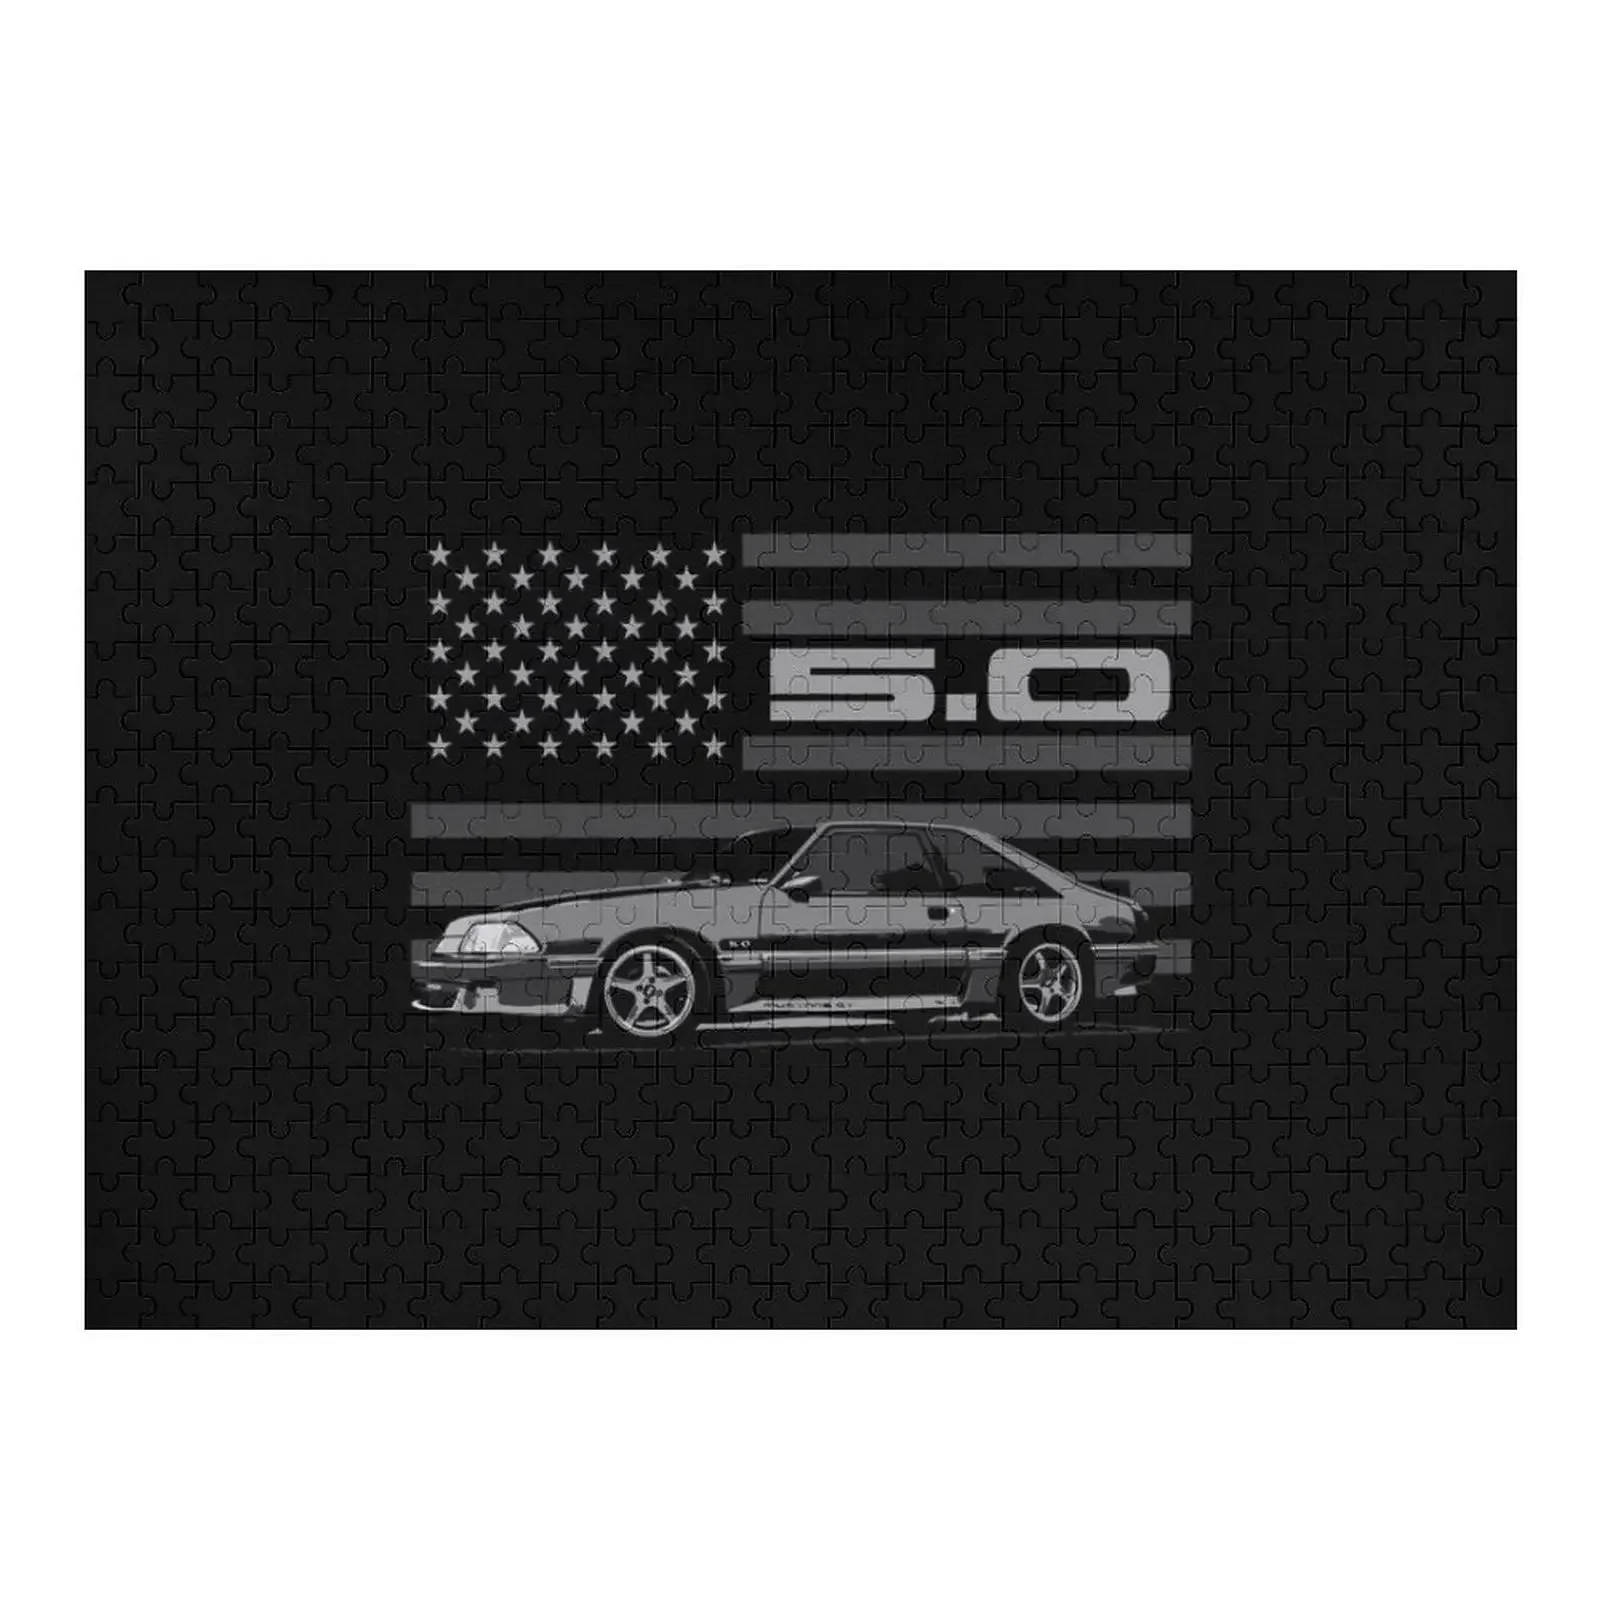 

Mustang GT 5.0 Foxbody Fox Body American Icon Jigsaw Puzzle Scale Motors Wooden Jigsaws For Adults Puzzle